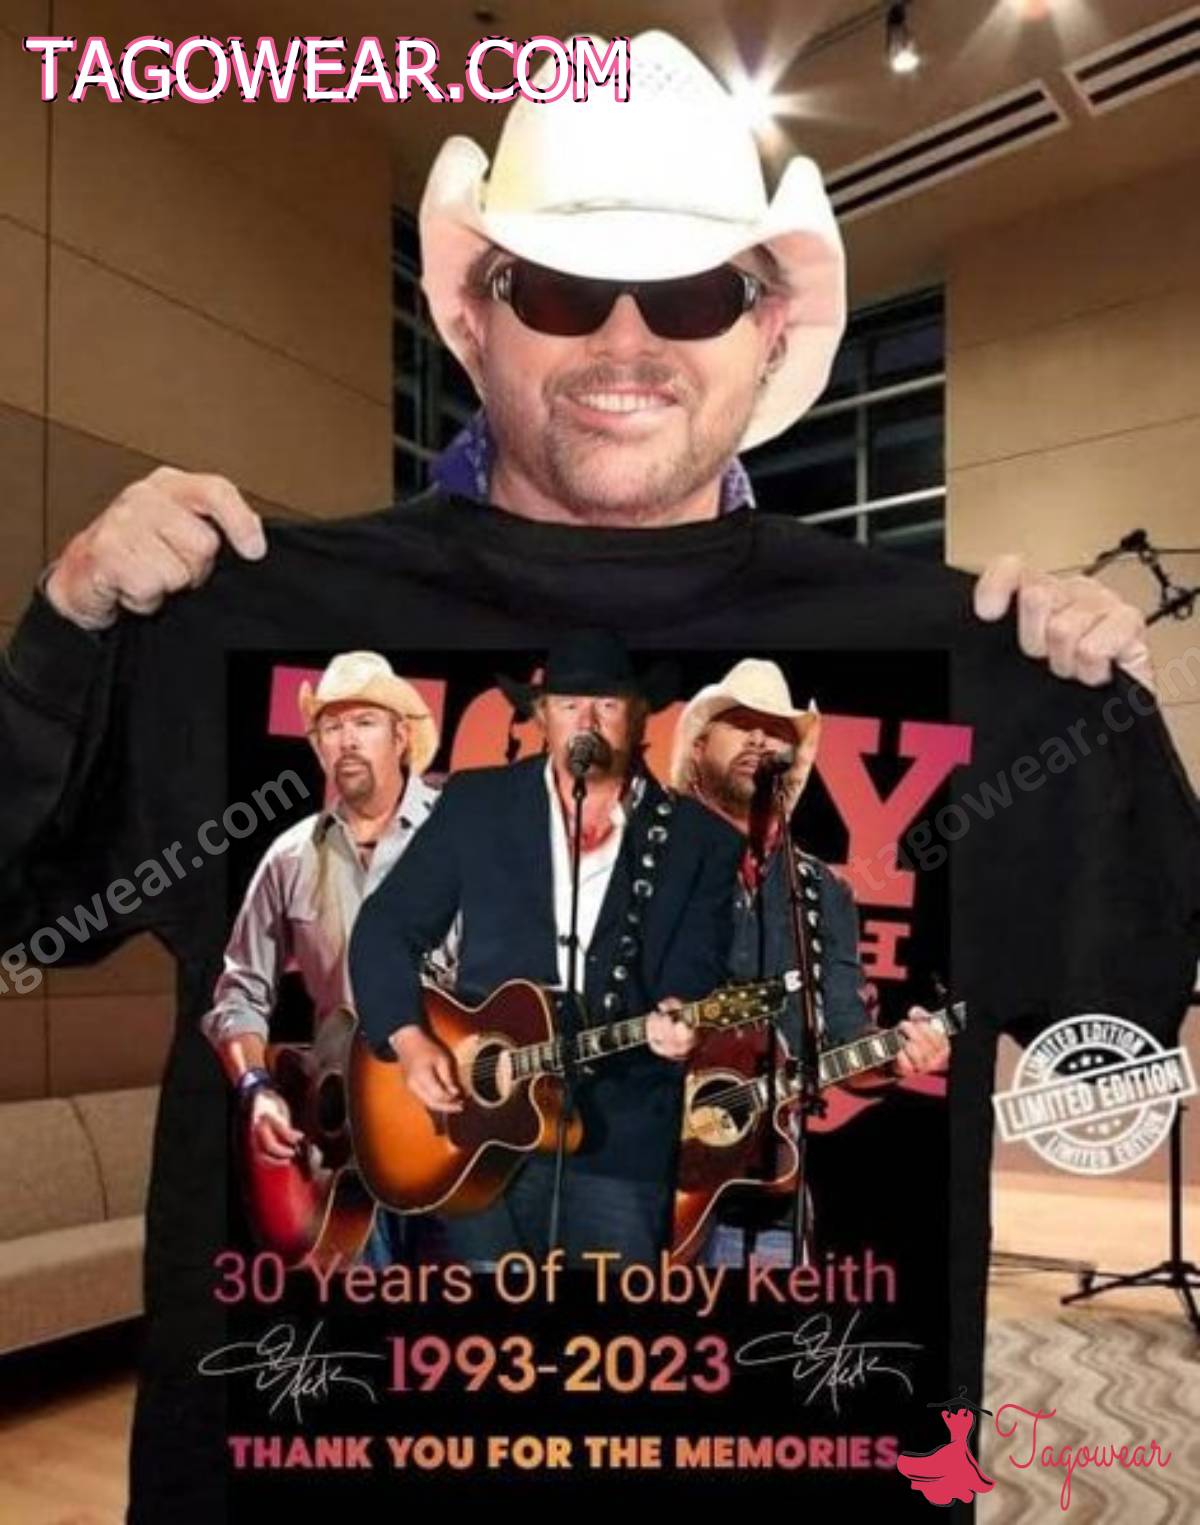 30 Years Of Toby Keith 1993-2023 Thank You For The Memories Signature Shirt